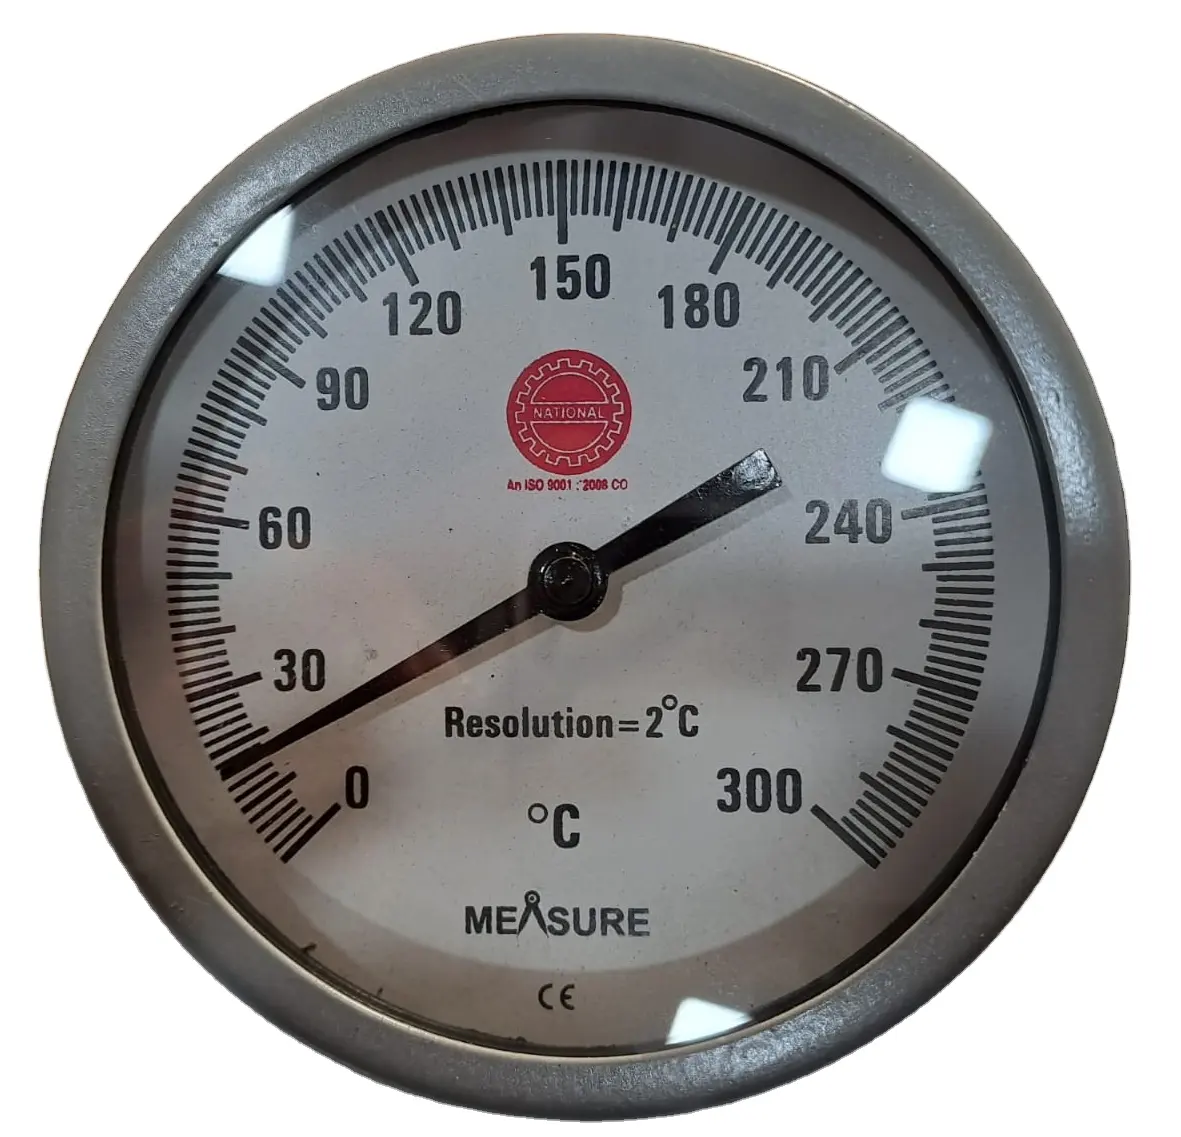 Premium Quality 4 inch Industrial Bimetal Thermometer Mild Steel Case Boiler Thermometer Available at Affordable Price